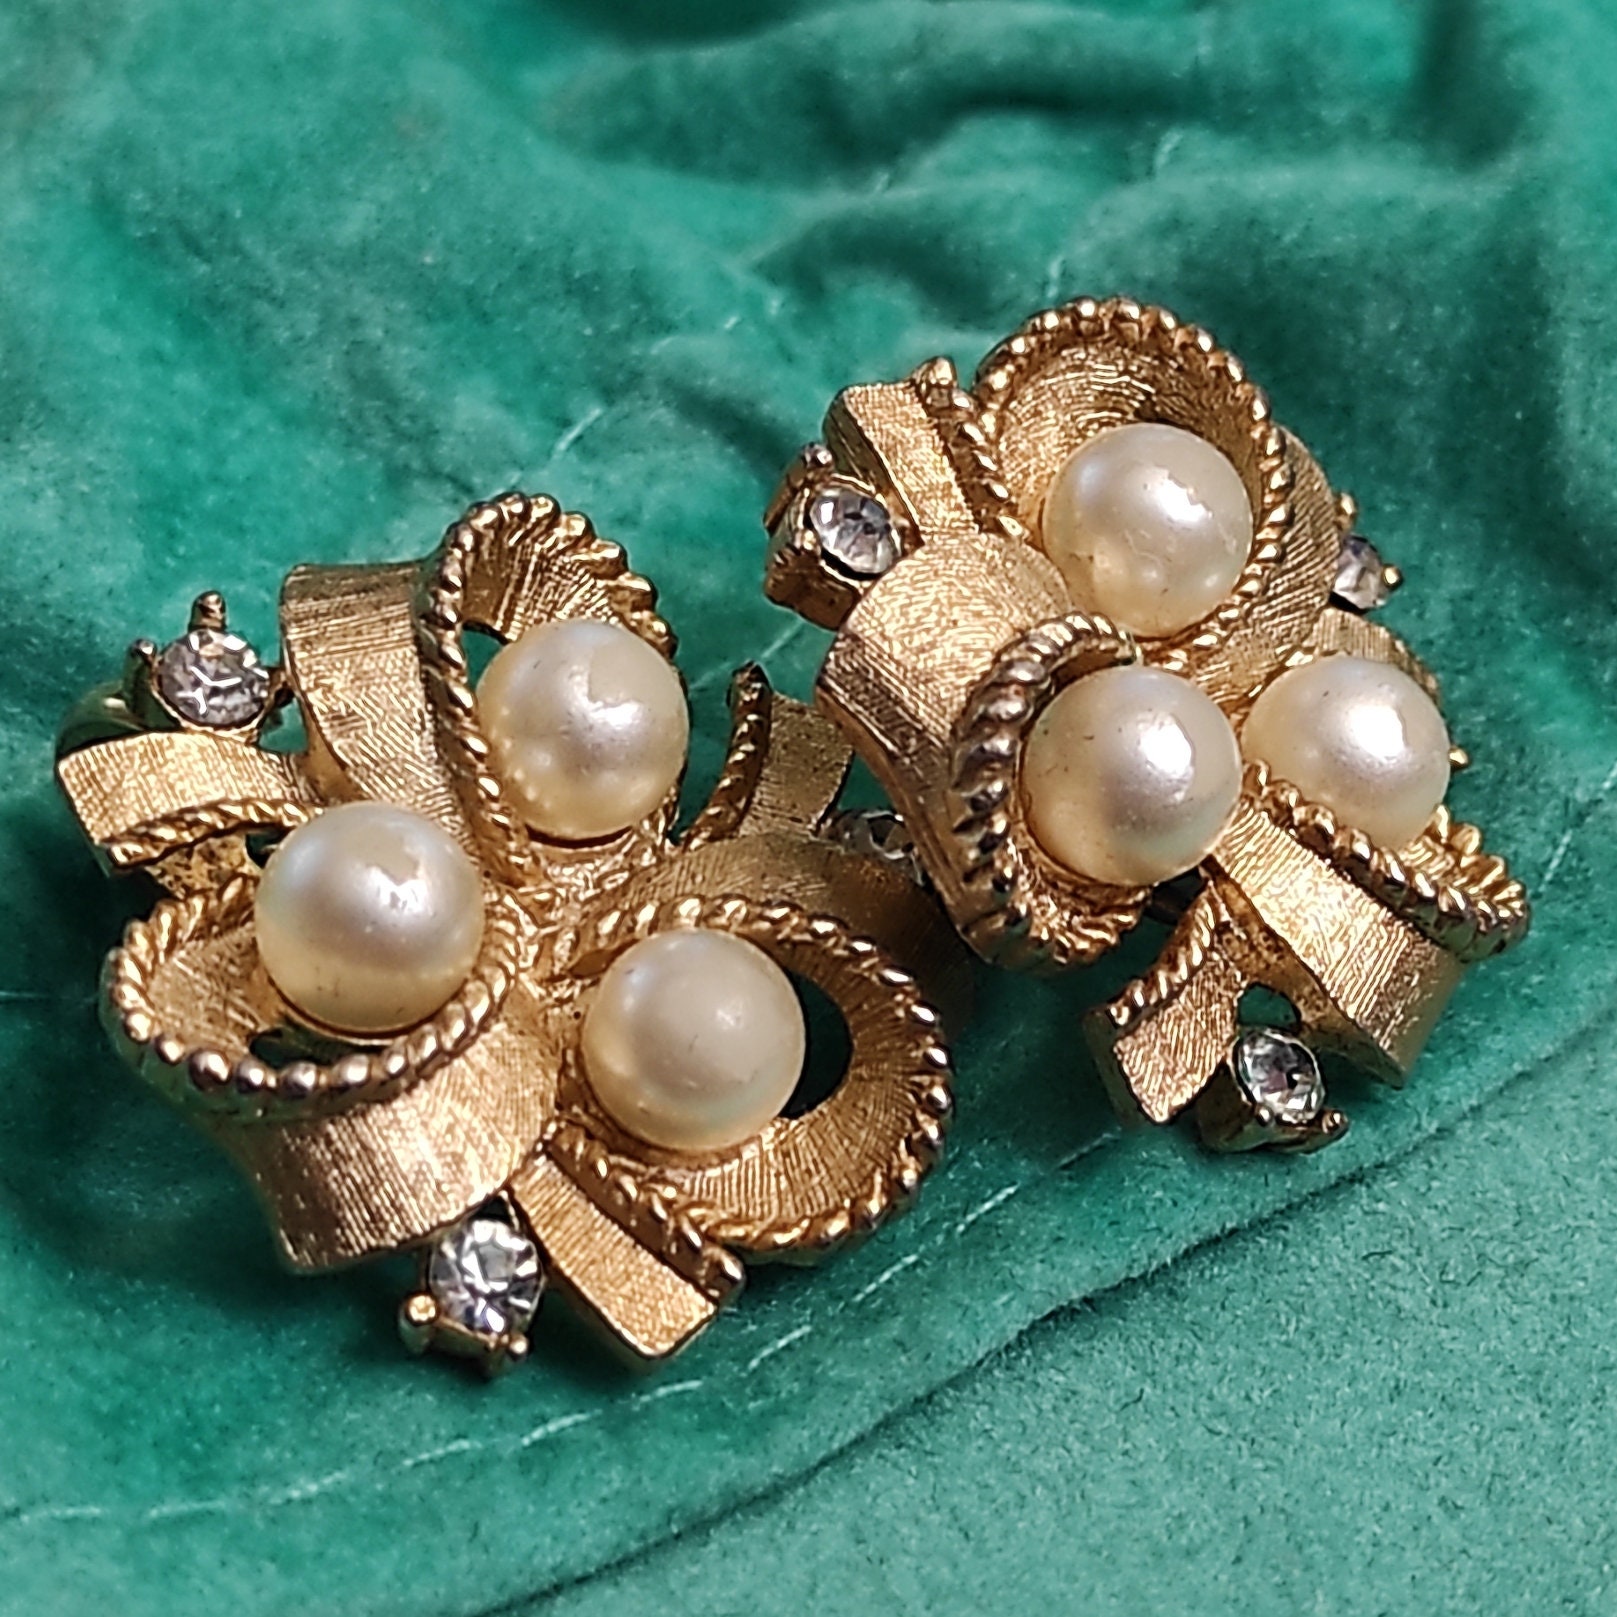 Trifari Golden metal and faux pearls with small rhinestones